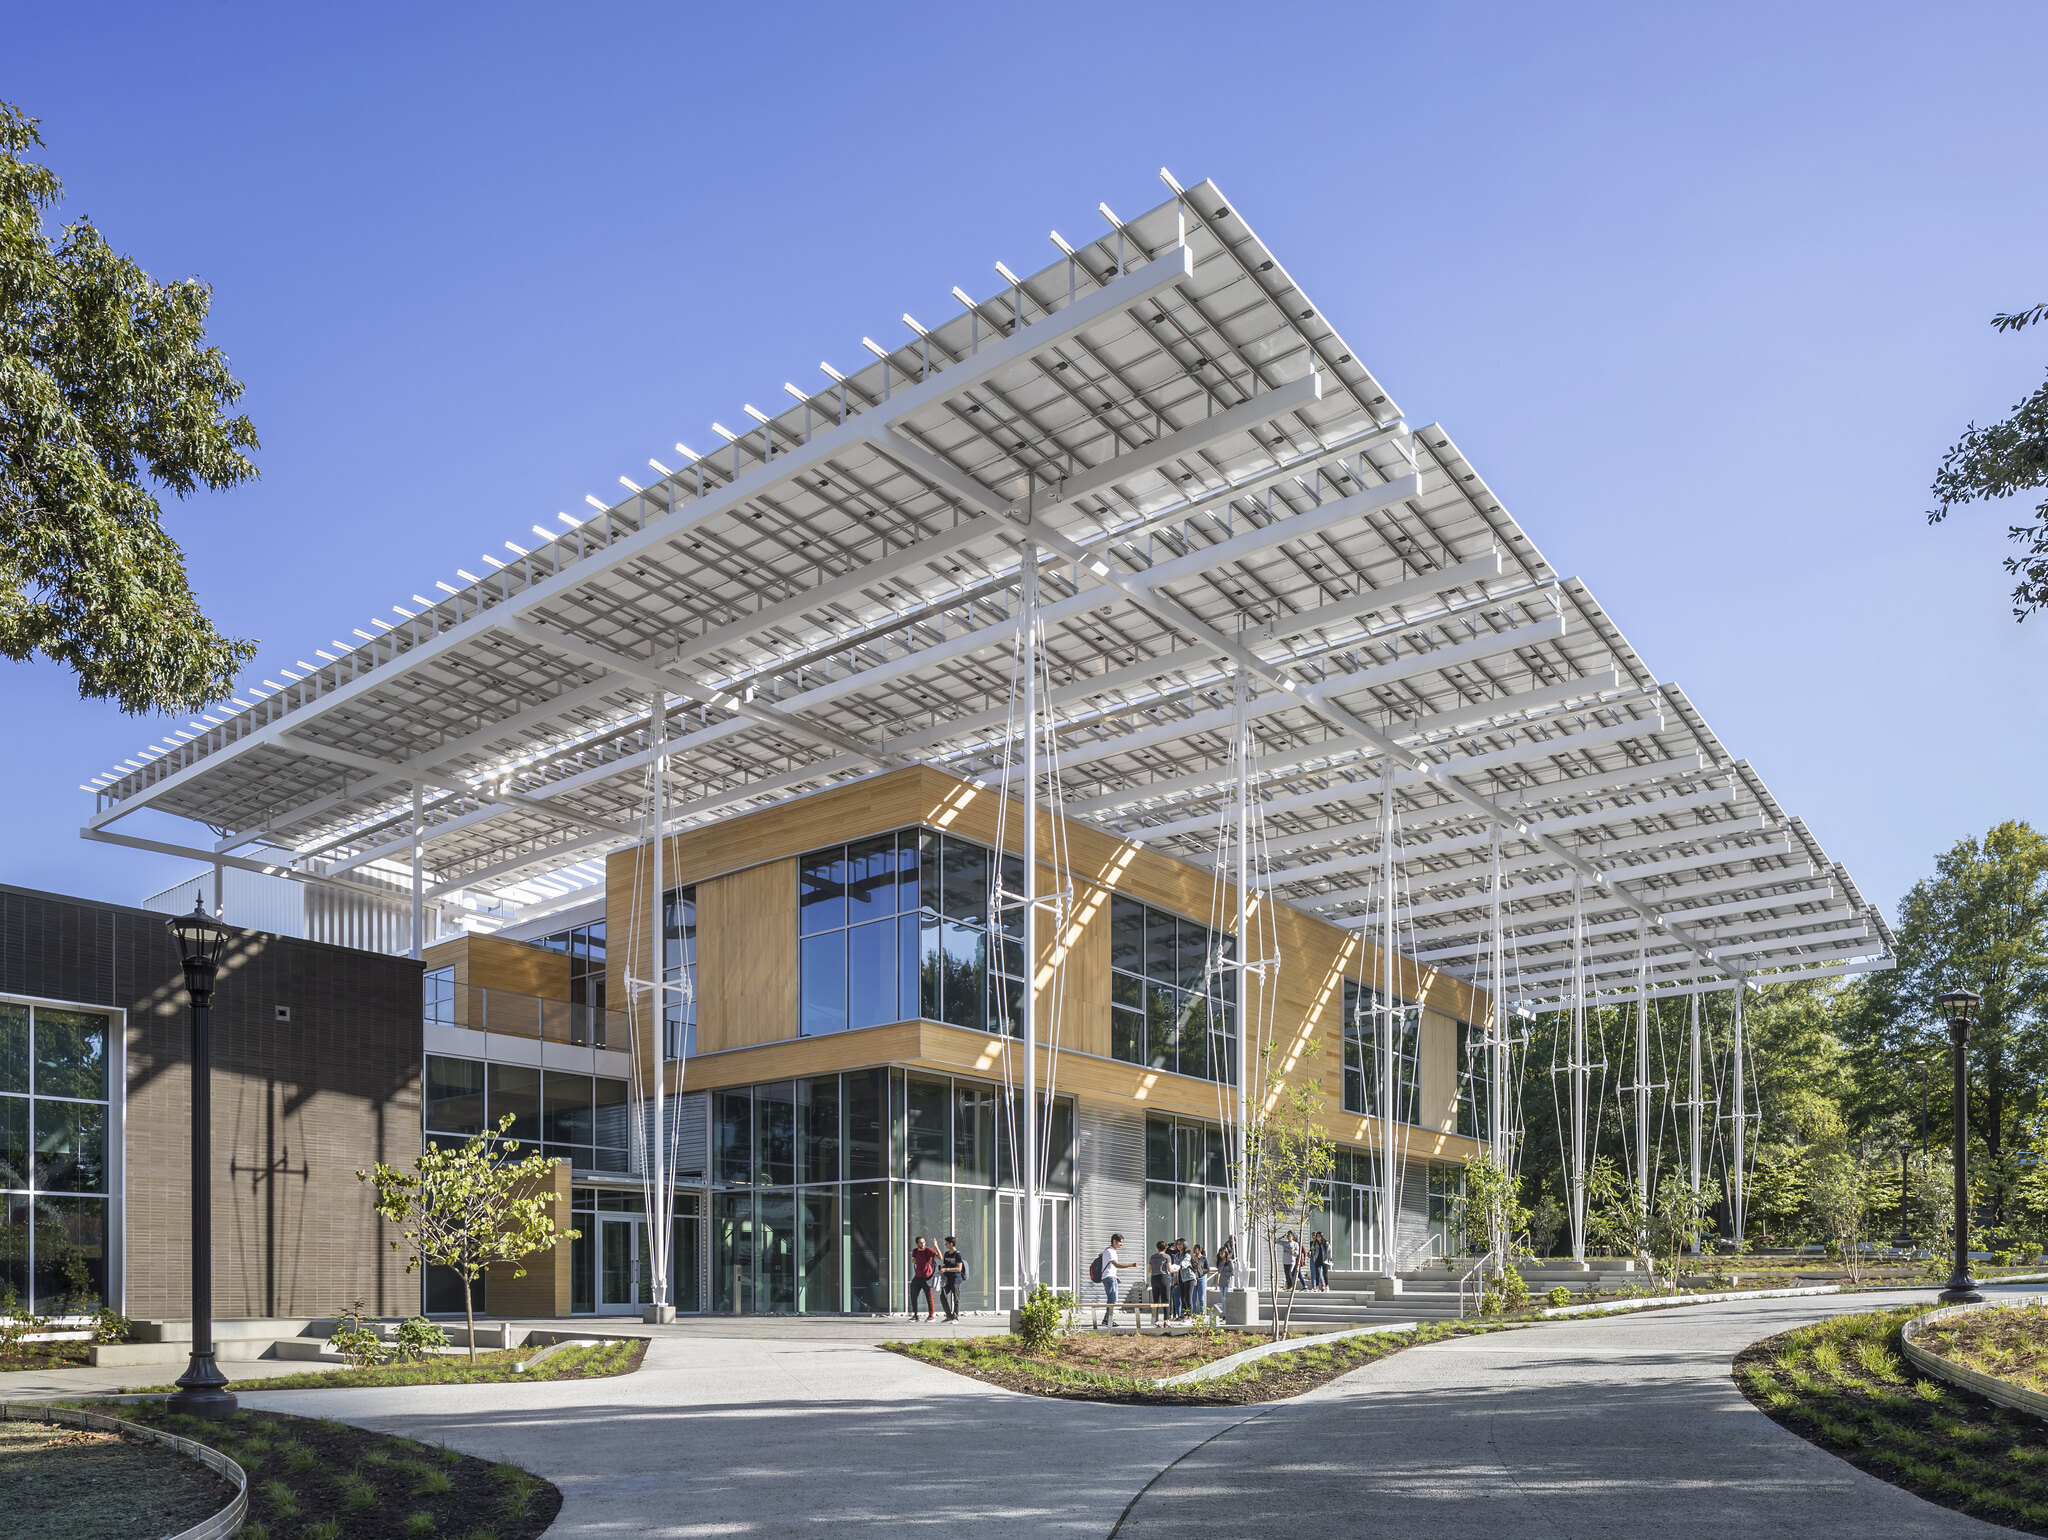 The Kendeda Building for Innovative Sustainable Design